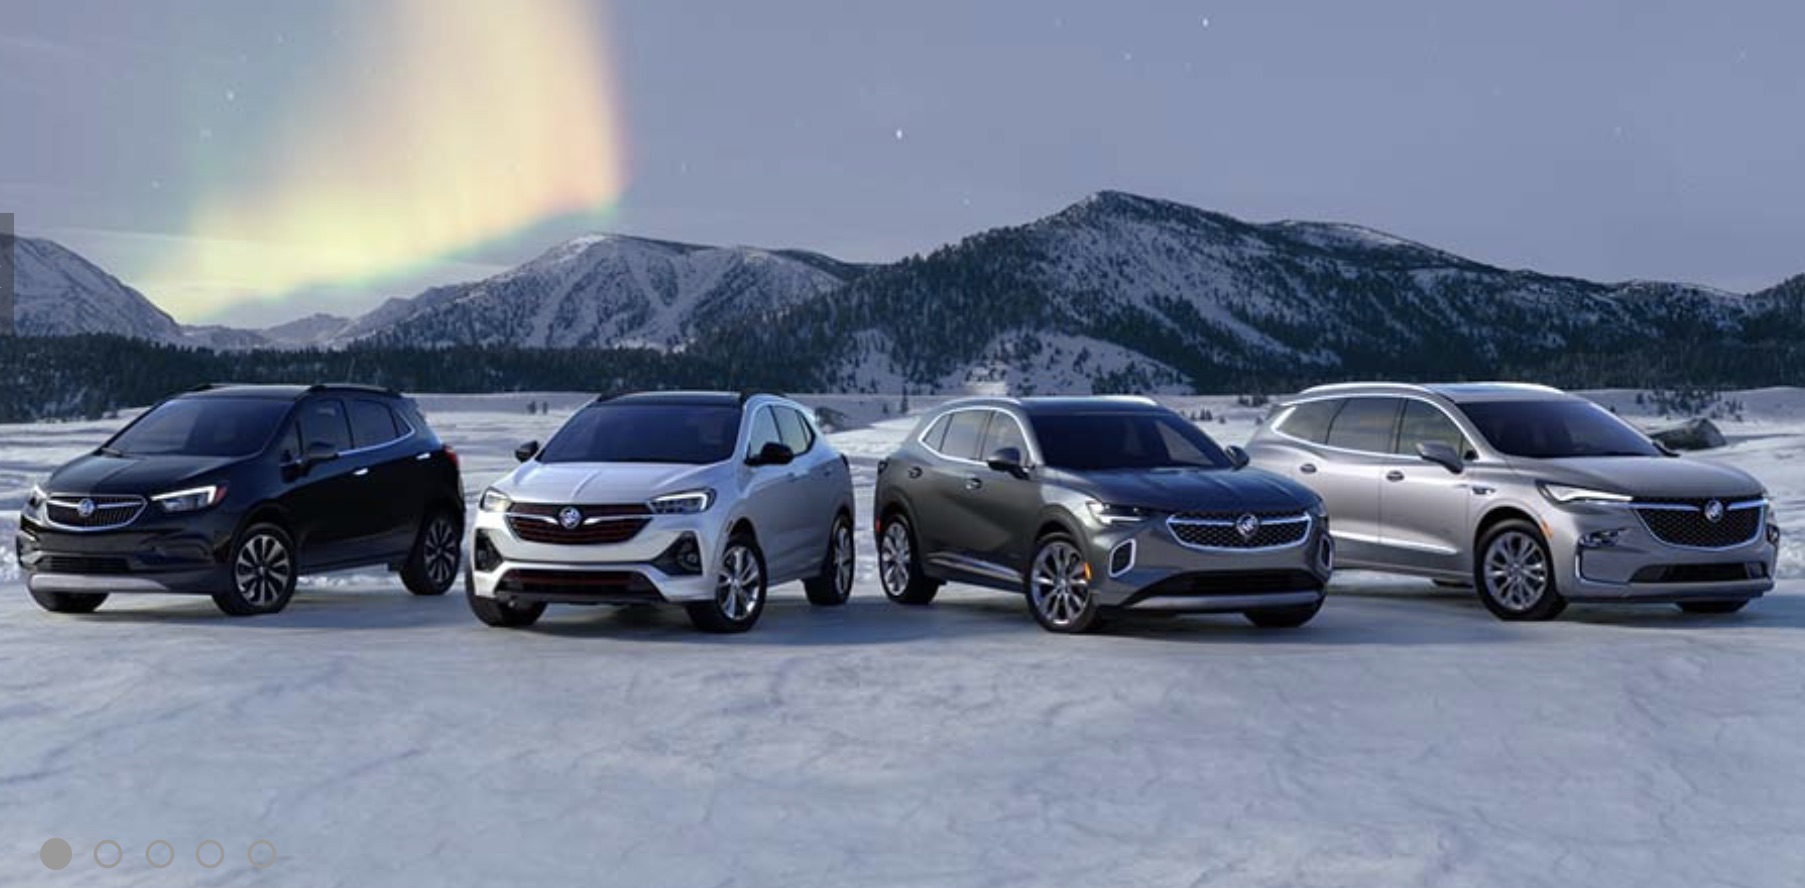 4 Buick vehicles parked in front of a mountain range on a bed of snow, with the Northern Lights in the background.